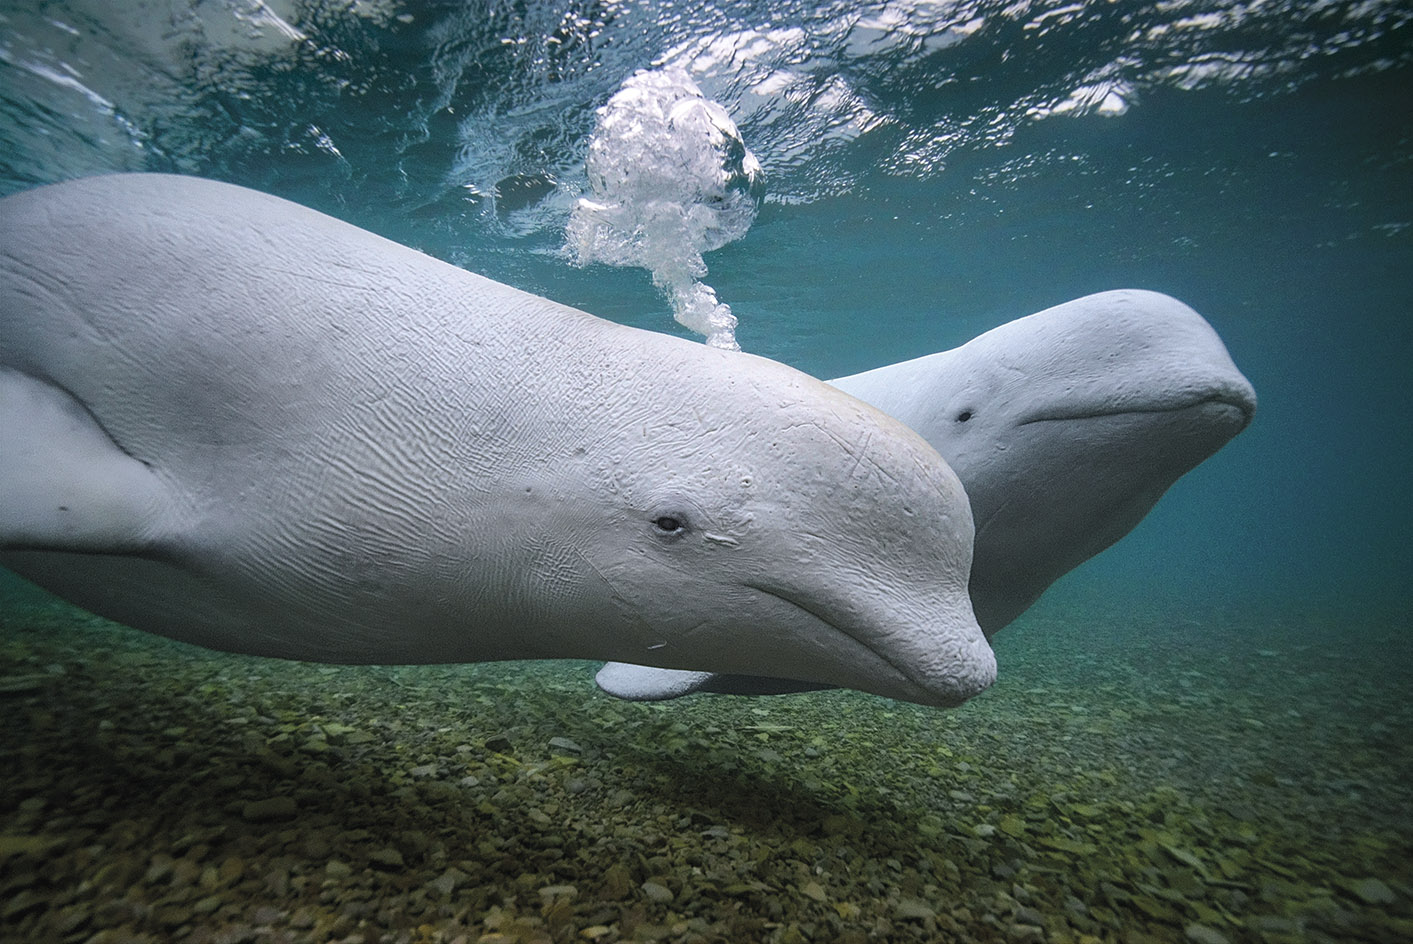 Beluga Whales underwater at Cunningham Inlet on Somerset Island in the Canadian Arctic.